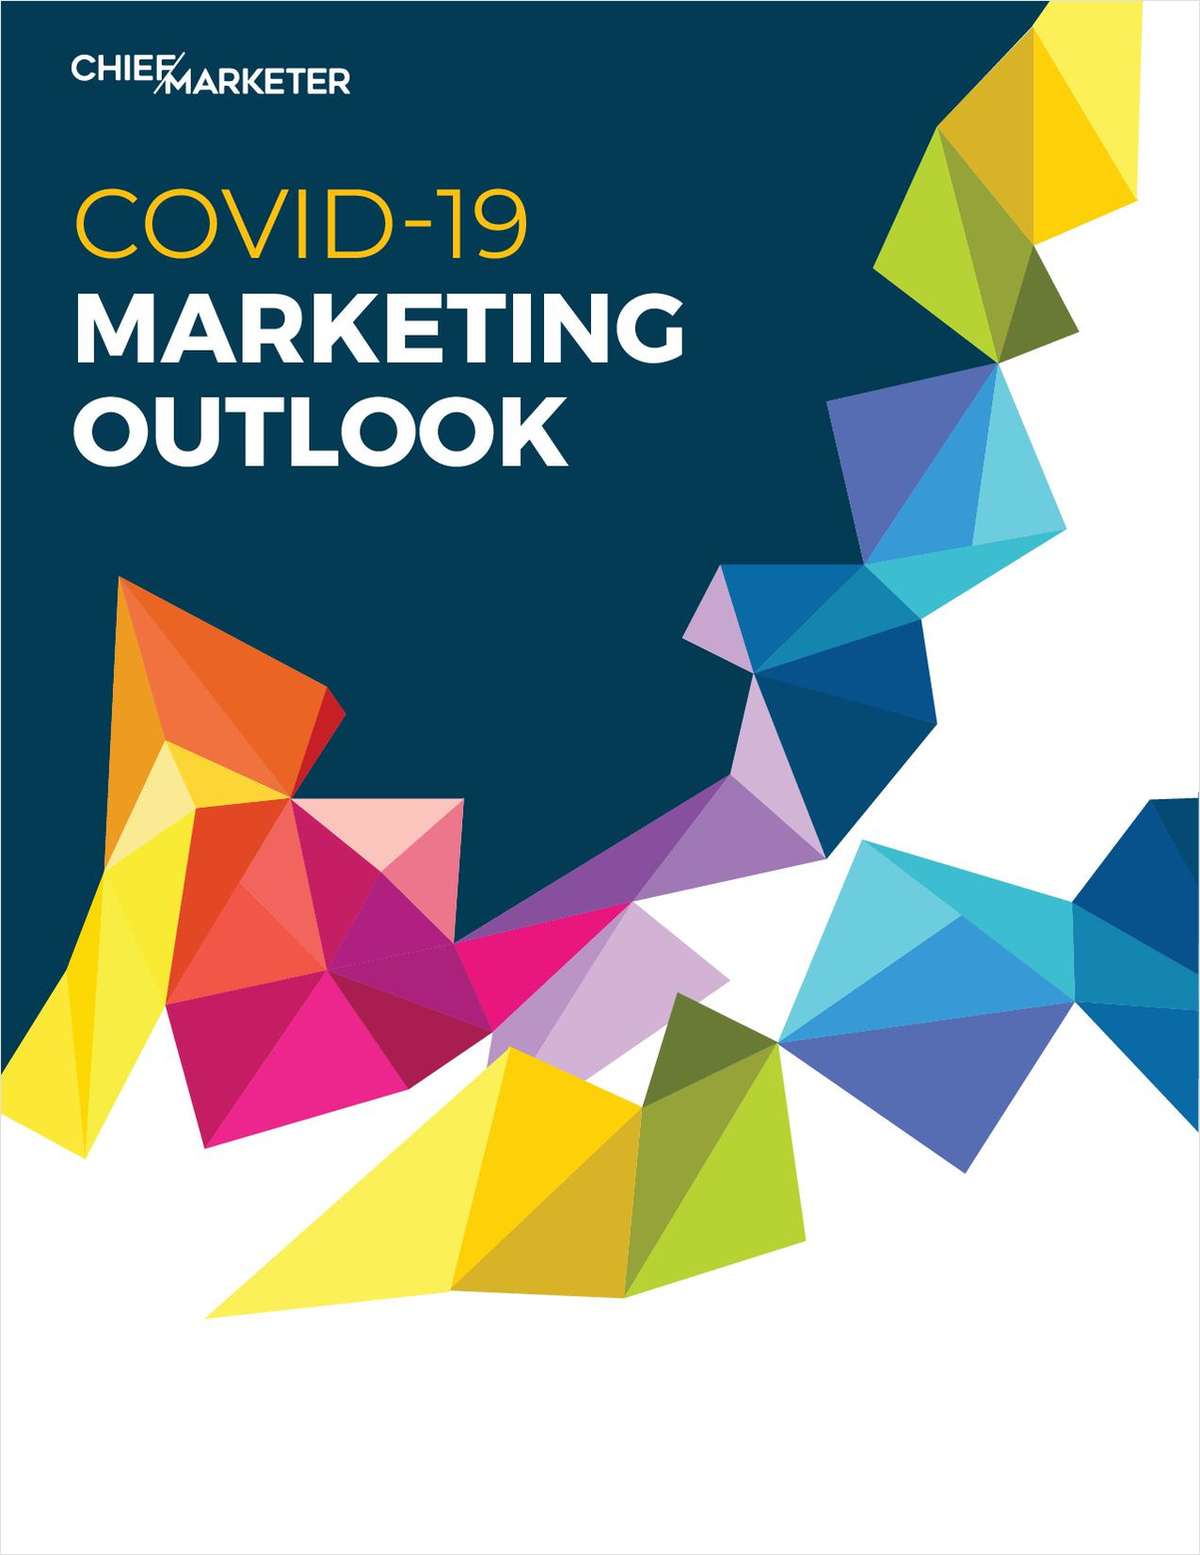 Chief Marketer's 2020 COVID-19 Marketing Outlook Report